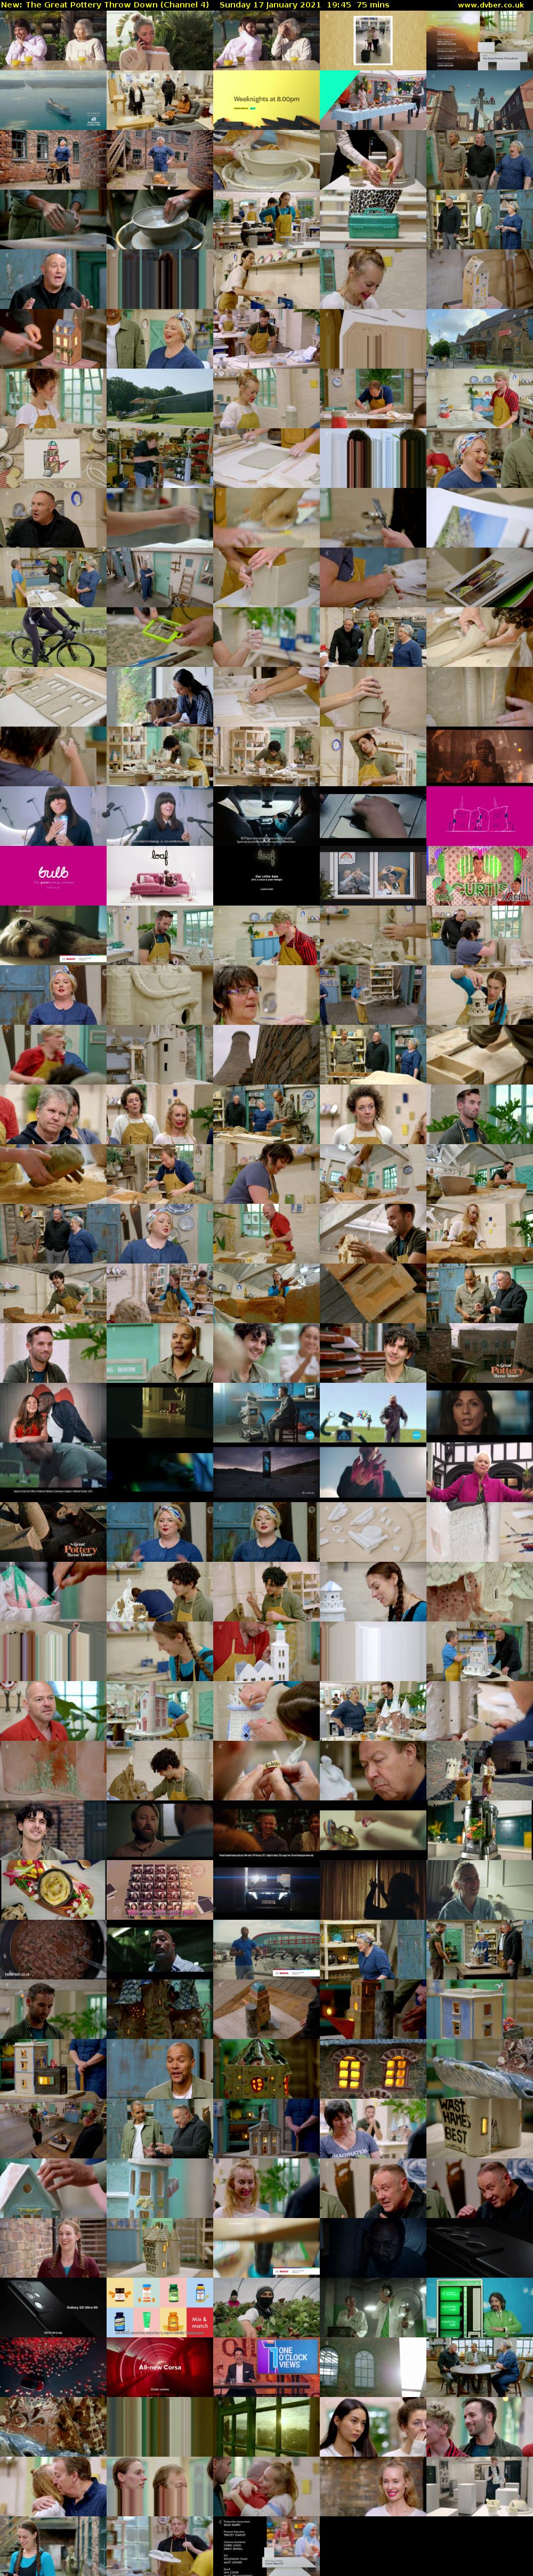 The Great Pottery Throw Down (Channel 4) Sunday 17 January 2021 19:45 - 21:00